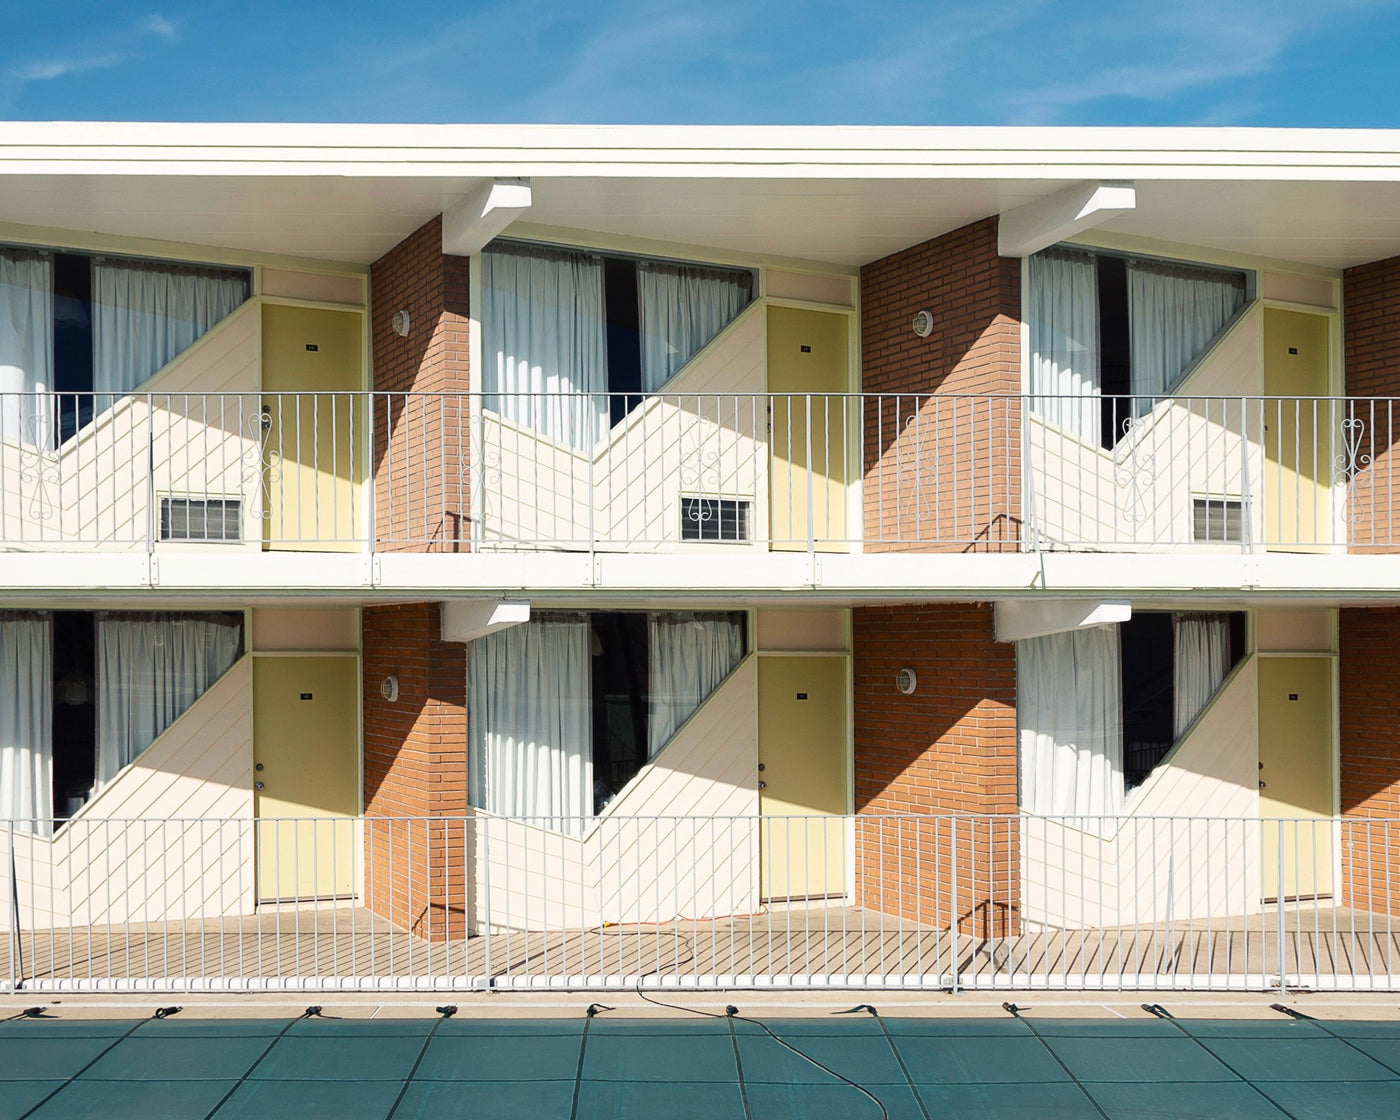 Photograph of doors in a motel